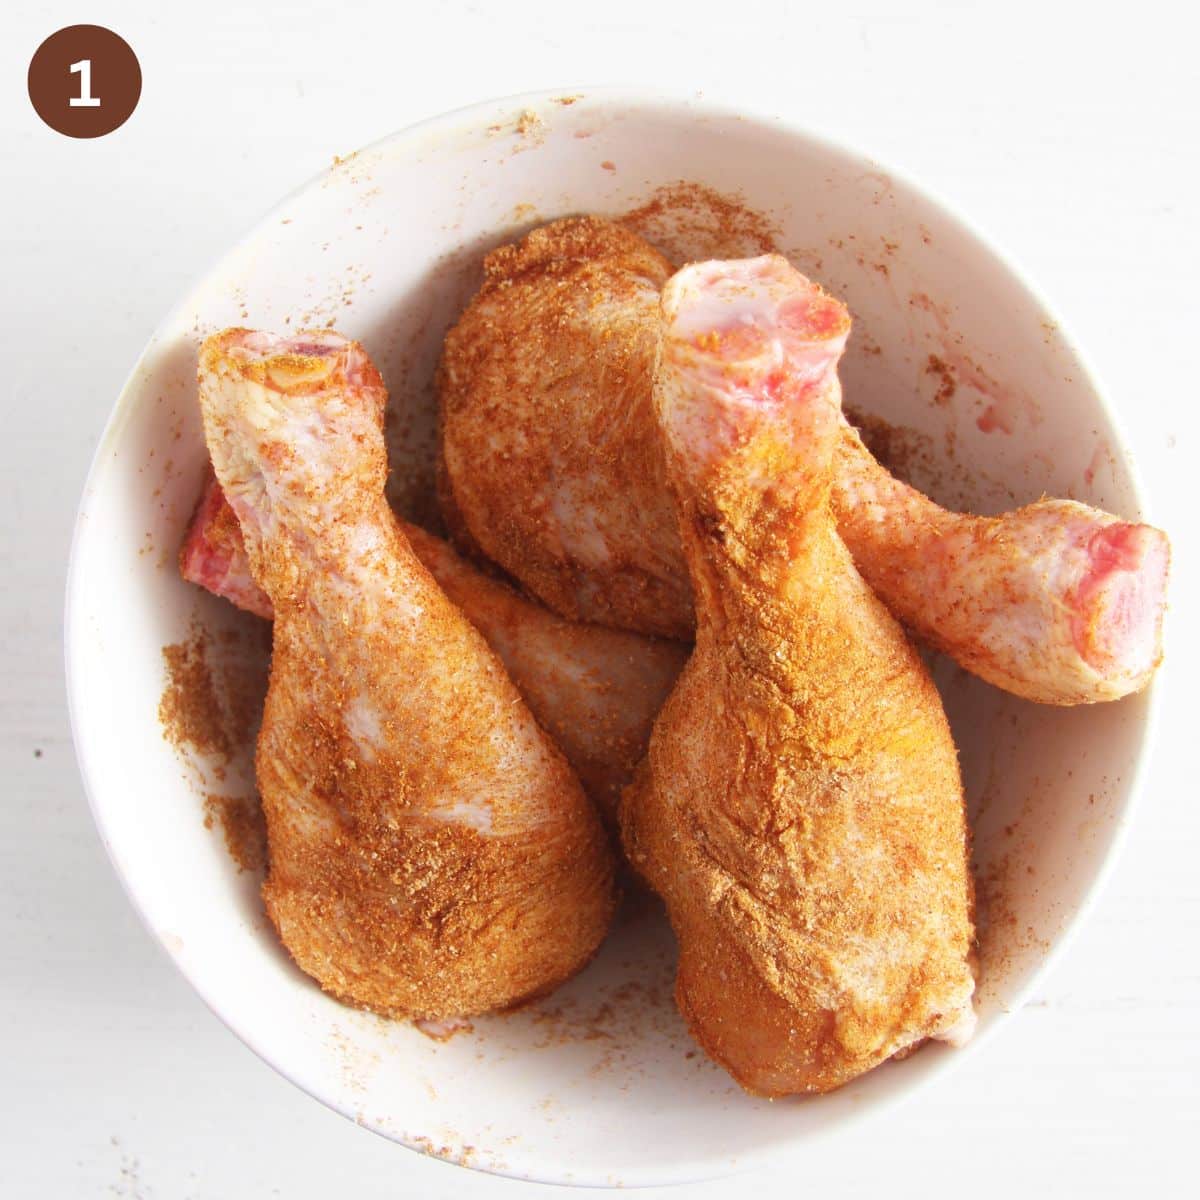 raw chicken legs coated with spices in a bowl.